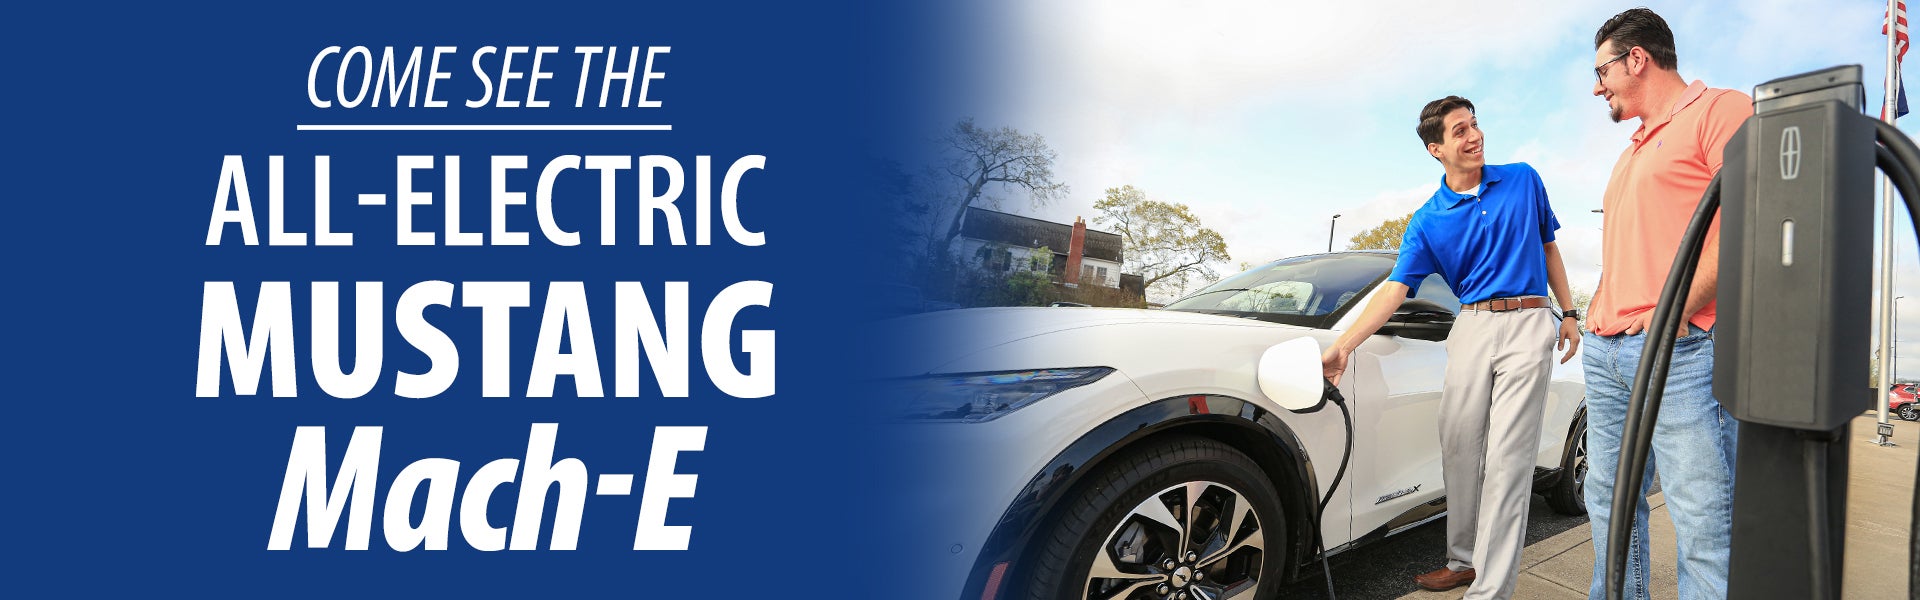 Test Drive the All-Electric Mustang Mach-E